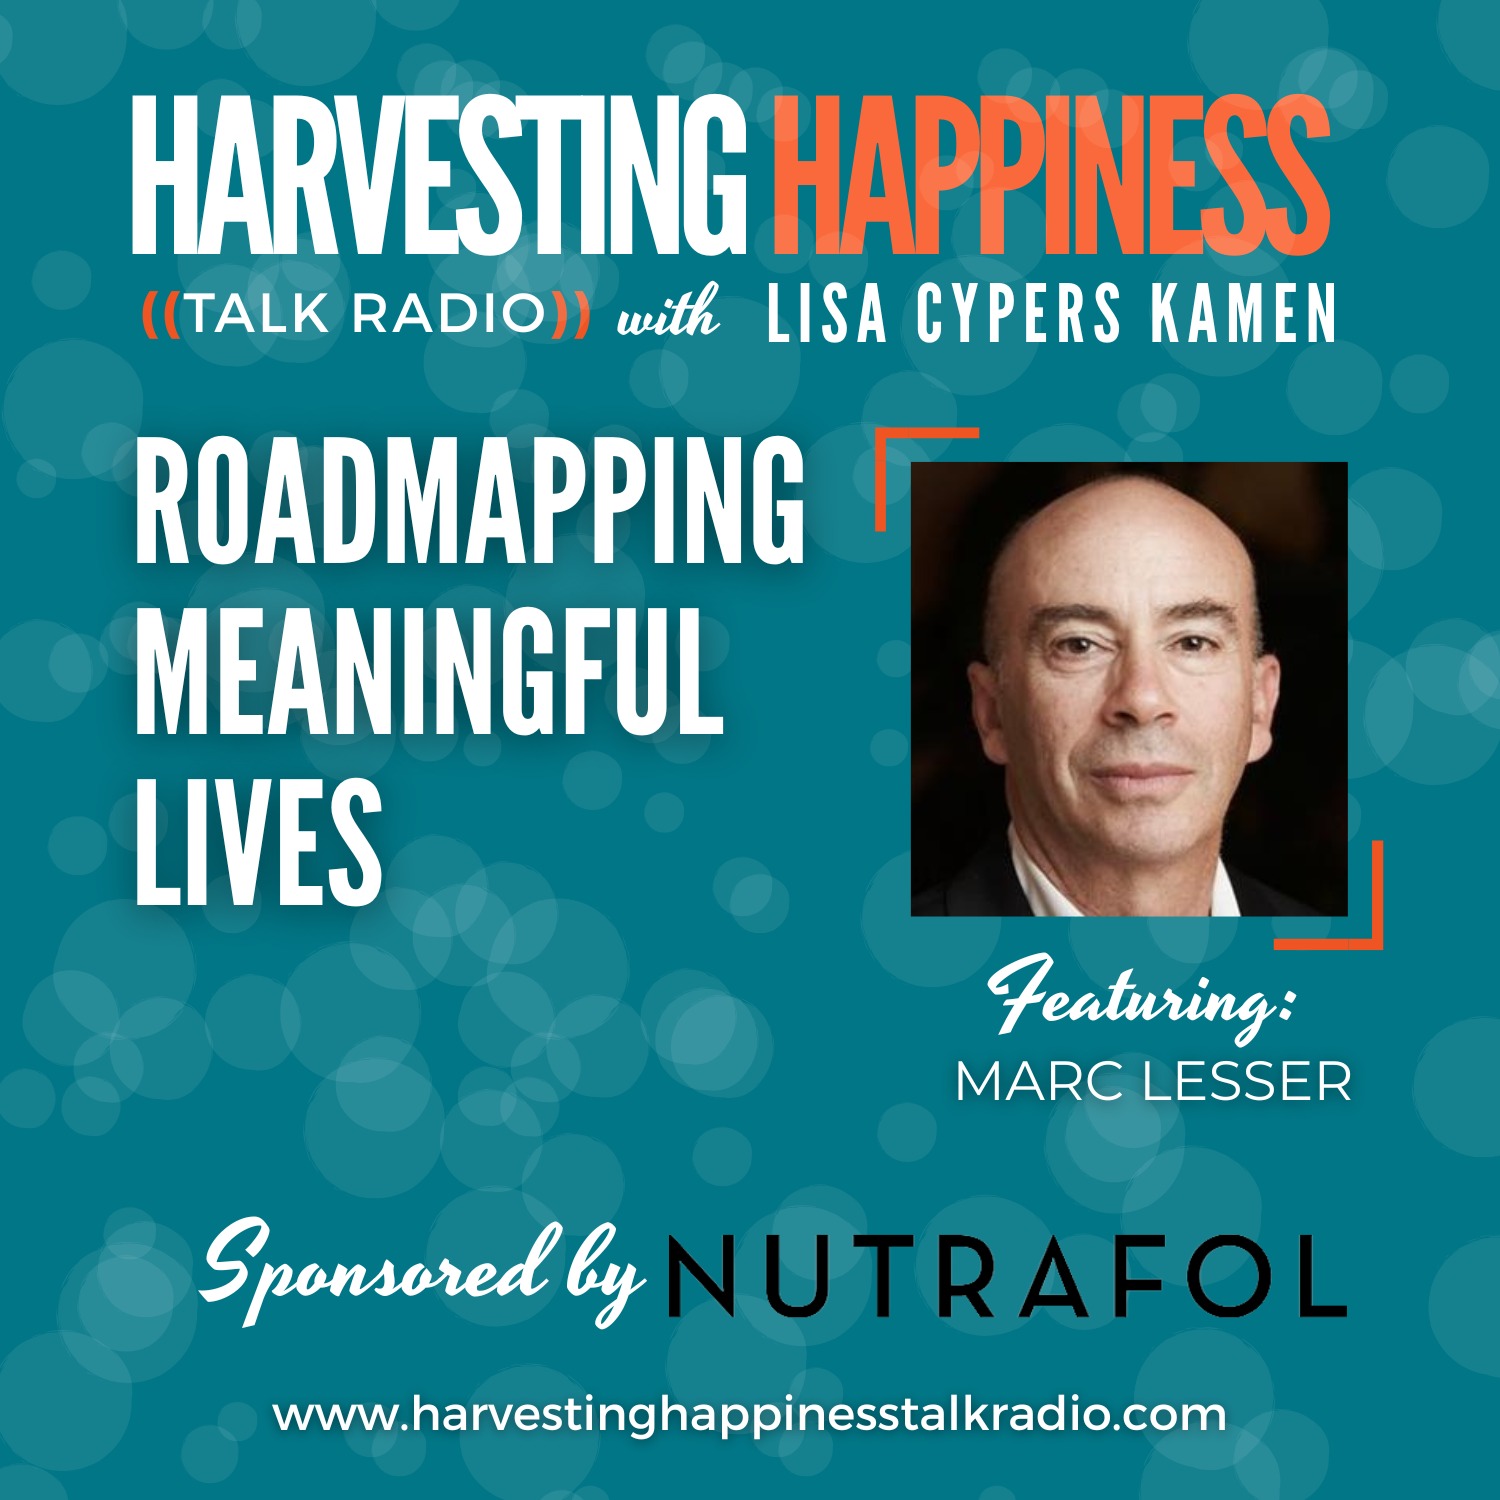 Podcast about meaningful lives with Marc Lesser, sponsored by Nutrafol